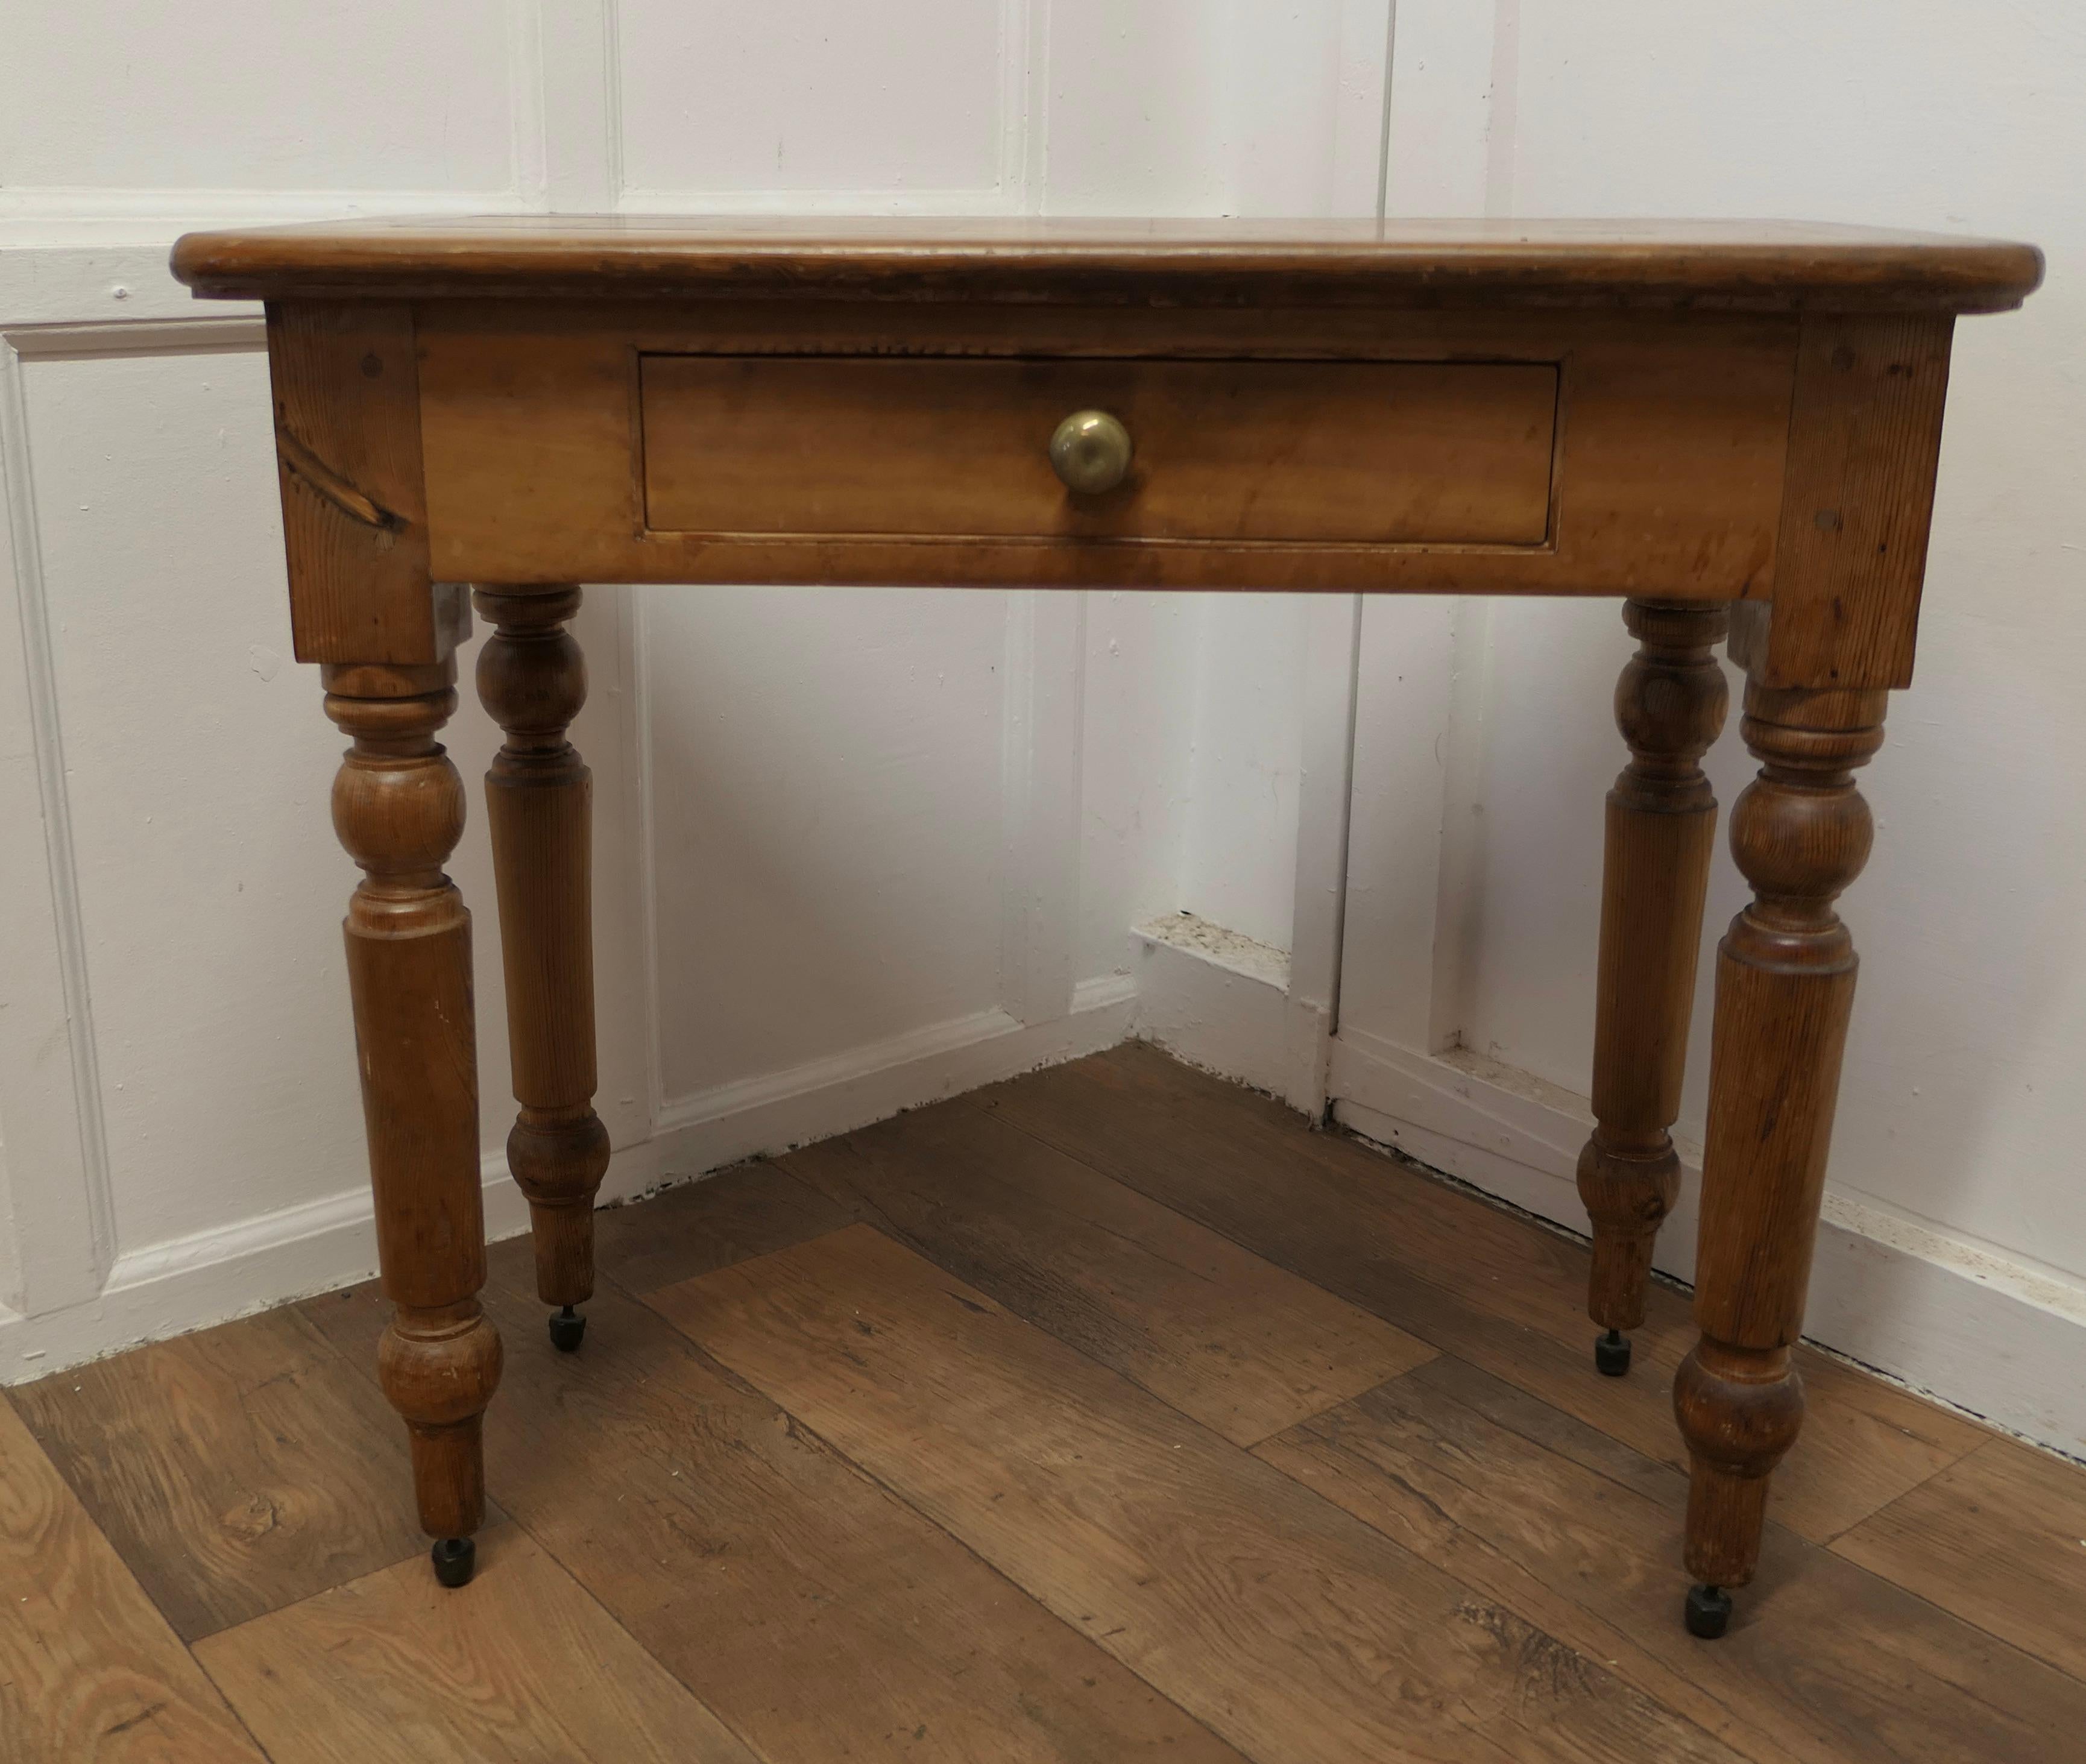  Victorian Pine Marquetry Writing or Side Table

This is a very attractive table, it has  a smooth rectangular top with slightly rounded corners and sturdy turned legs, there is a useful drawer, and the top is decorated with pine inlaid squares